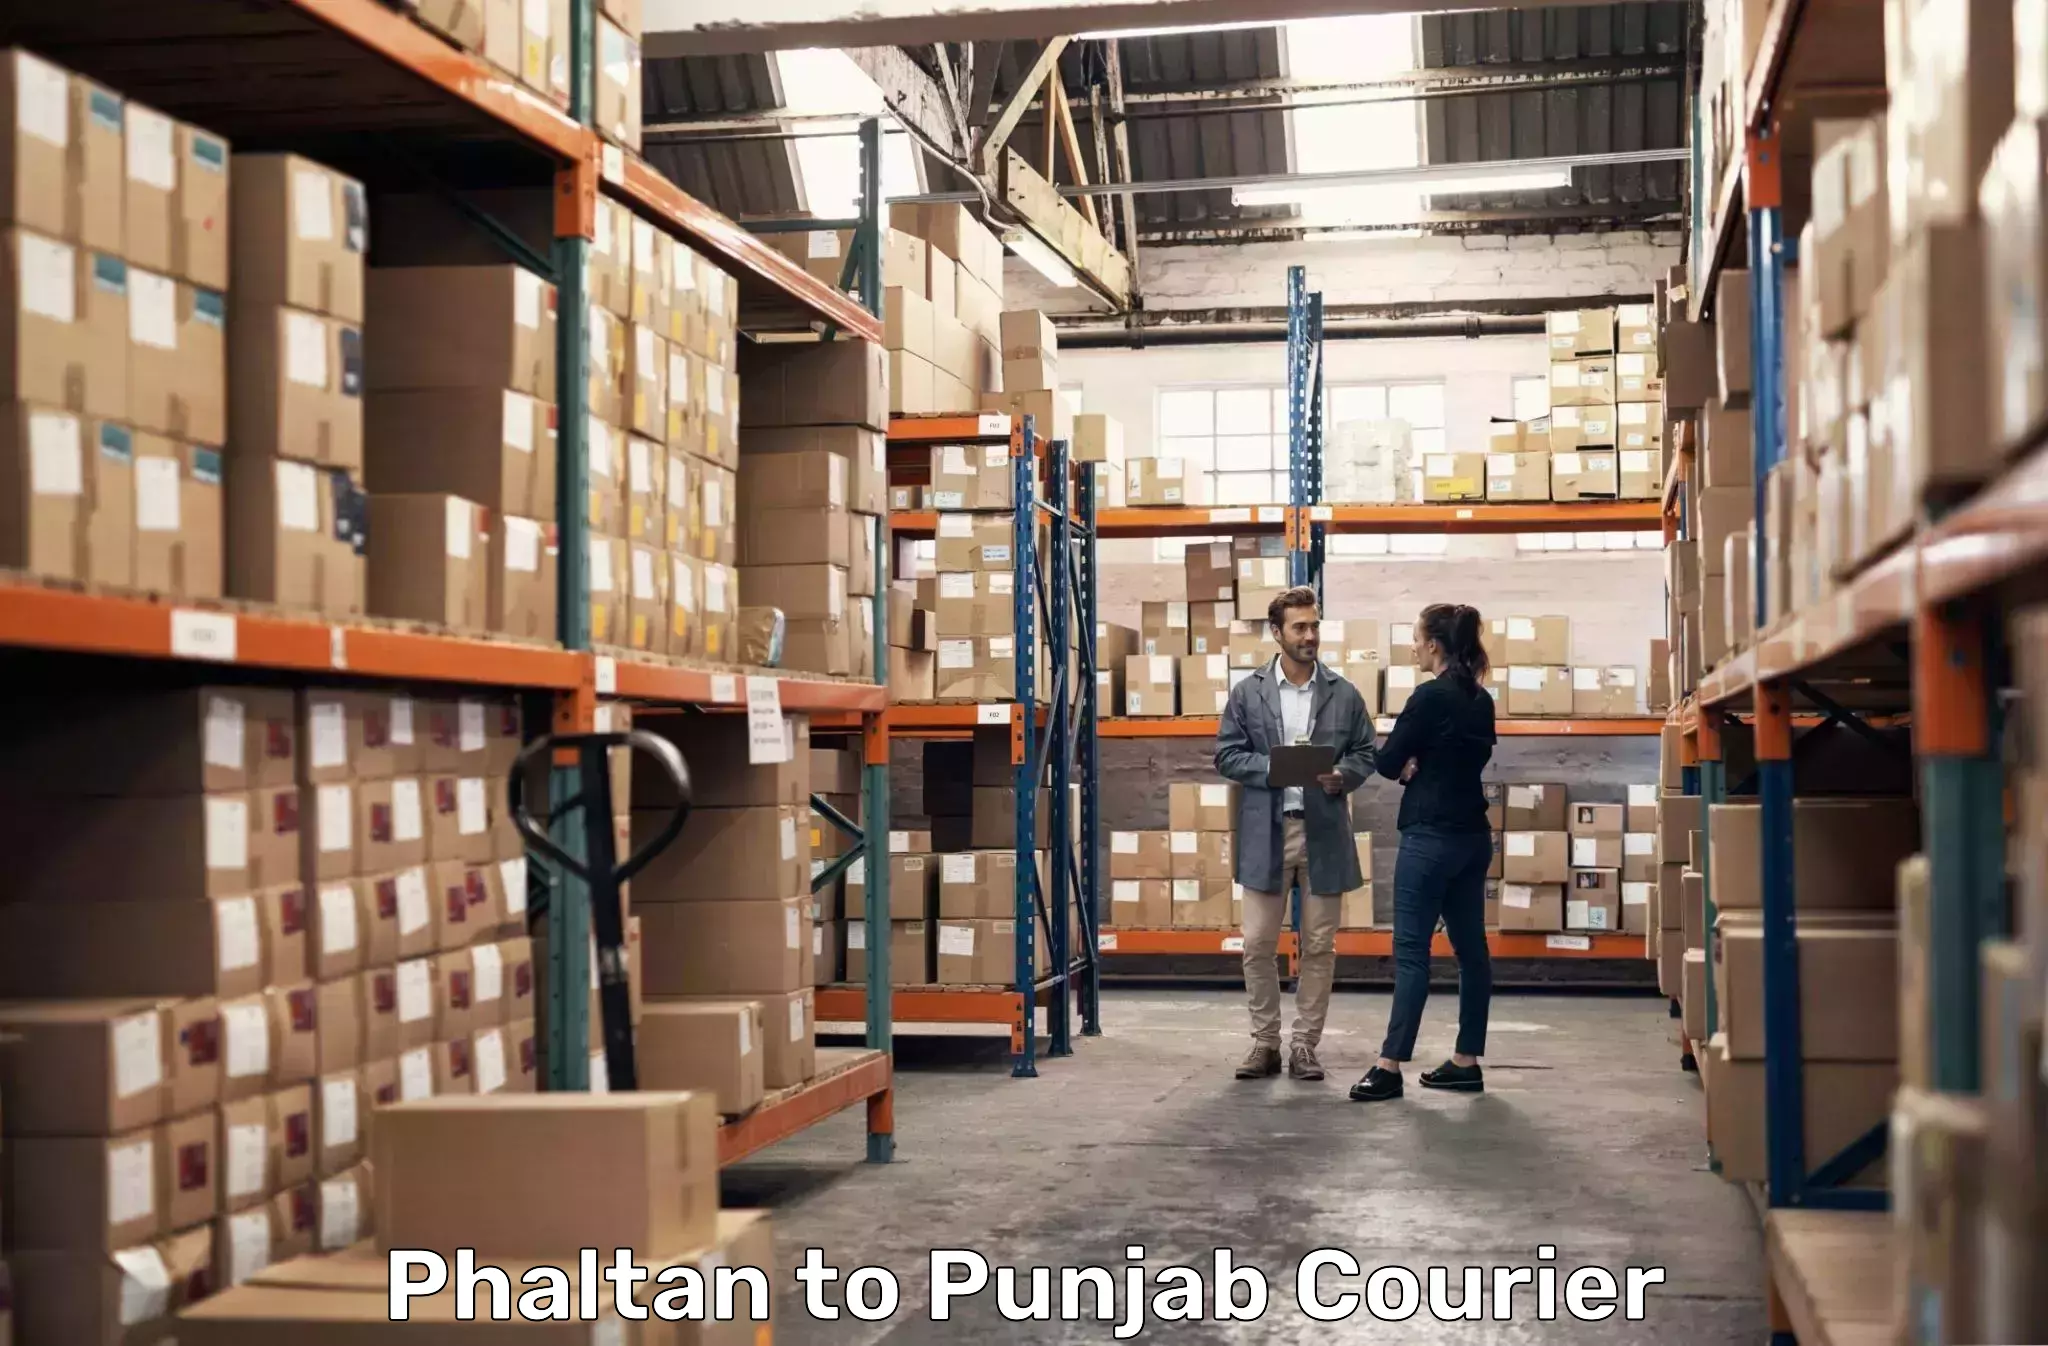 Customer-oriented courier services Phaltan to Punjab